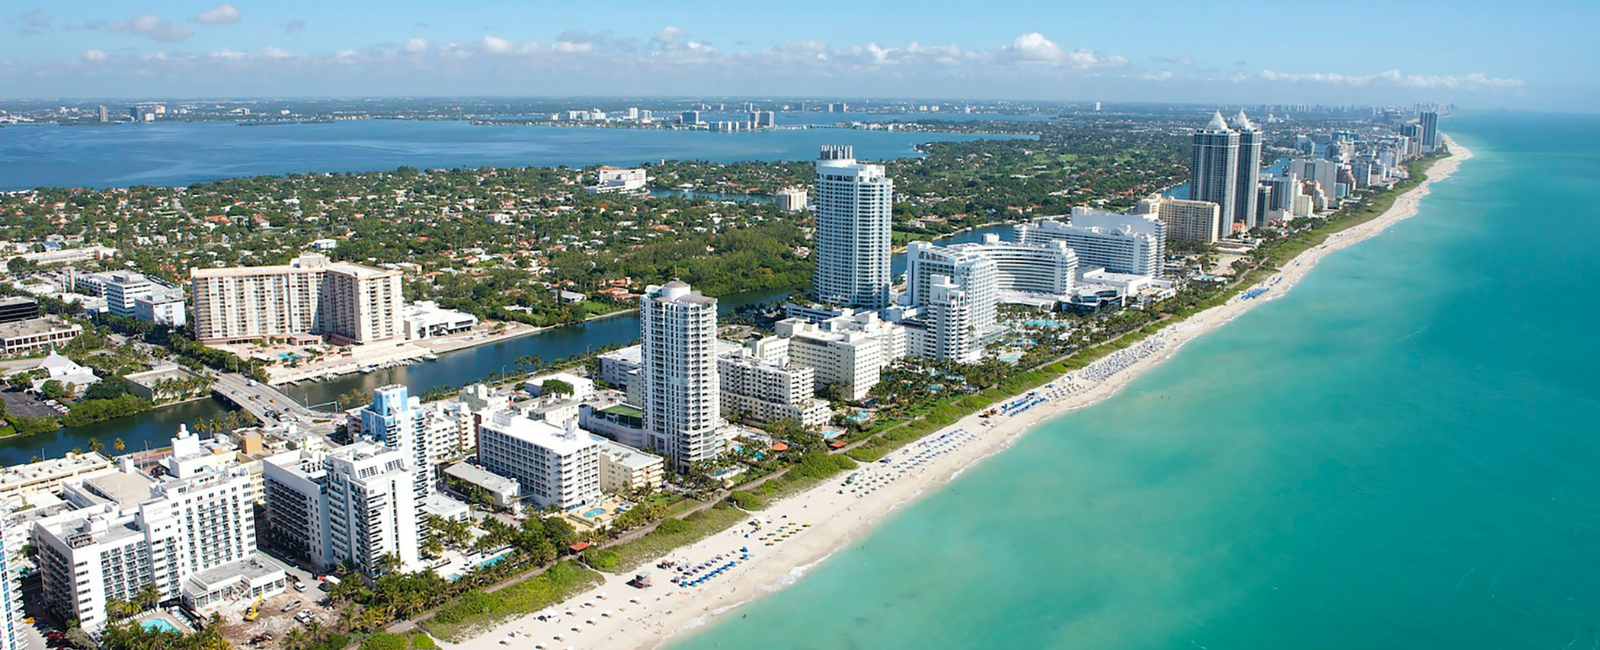 View of high-rise buildings and beaches in Miami